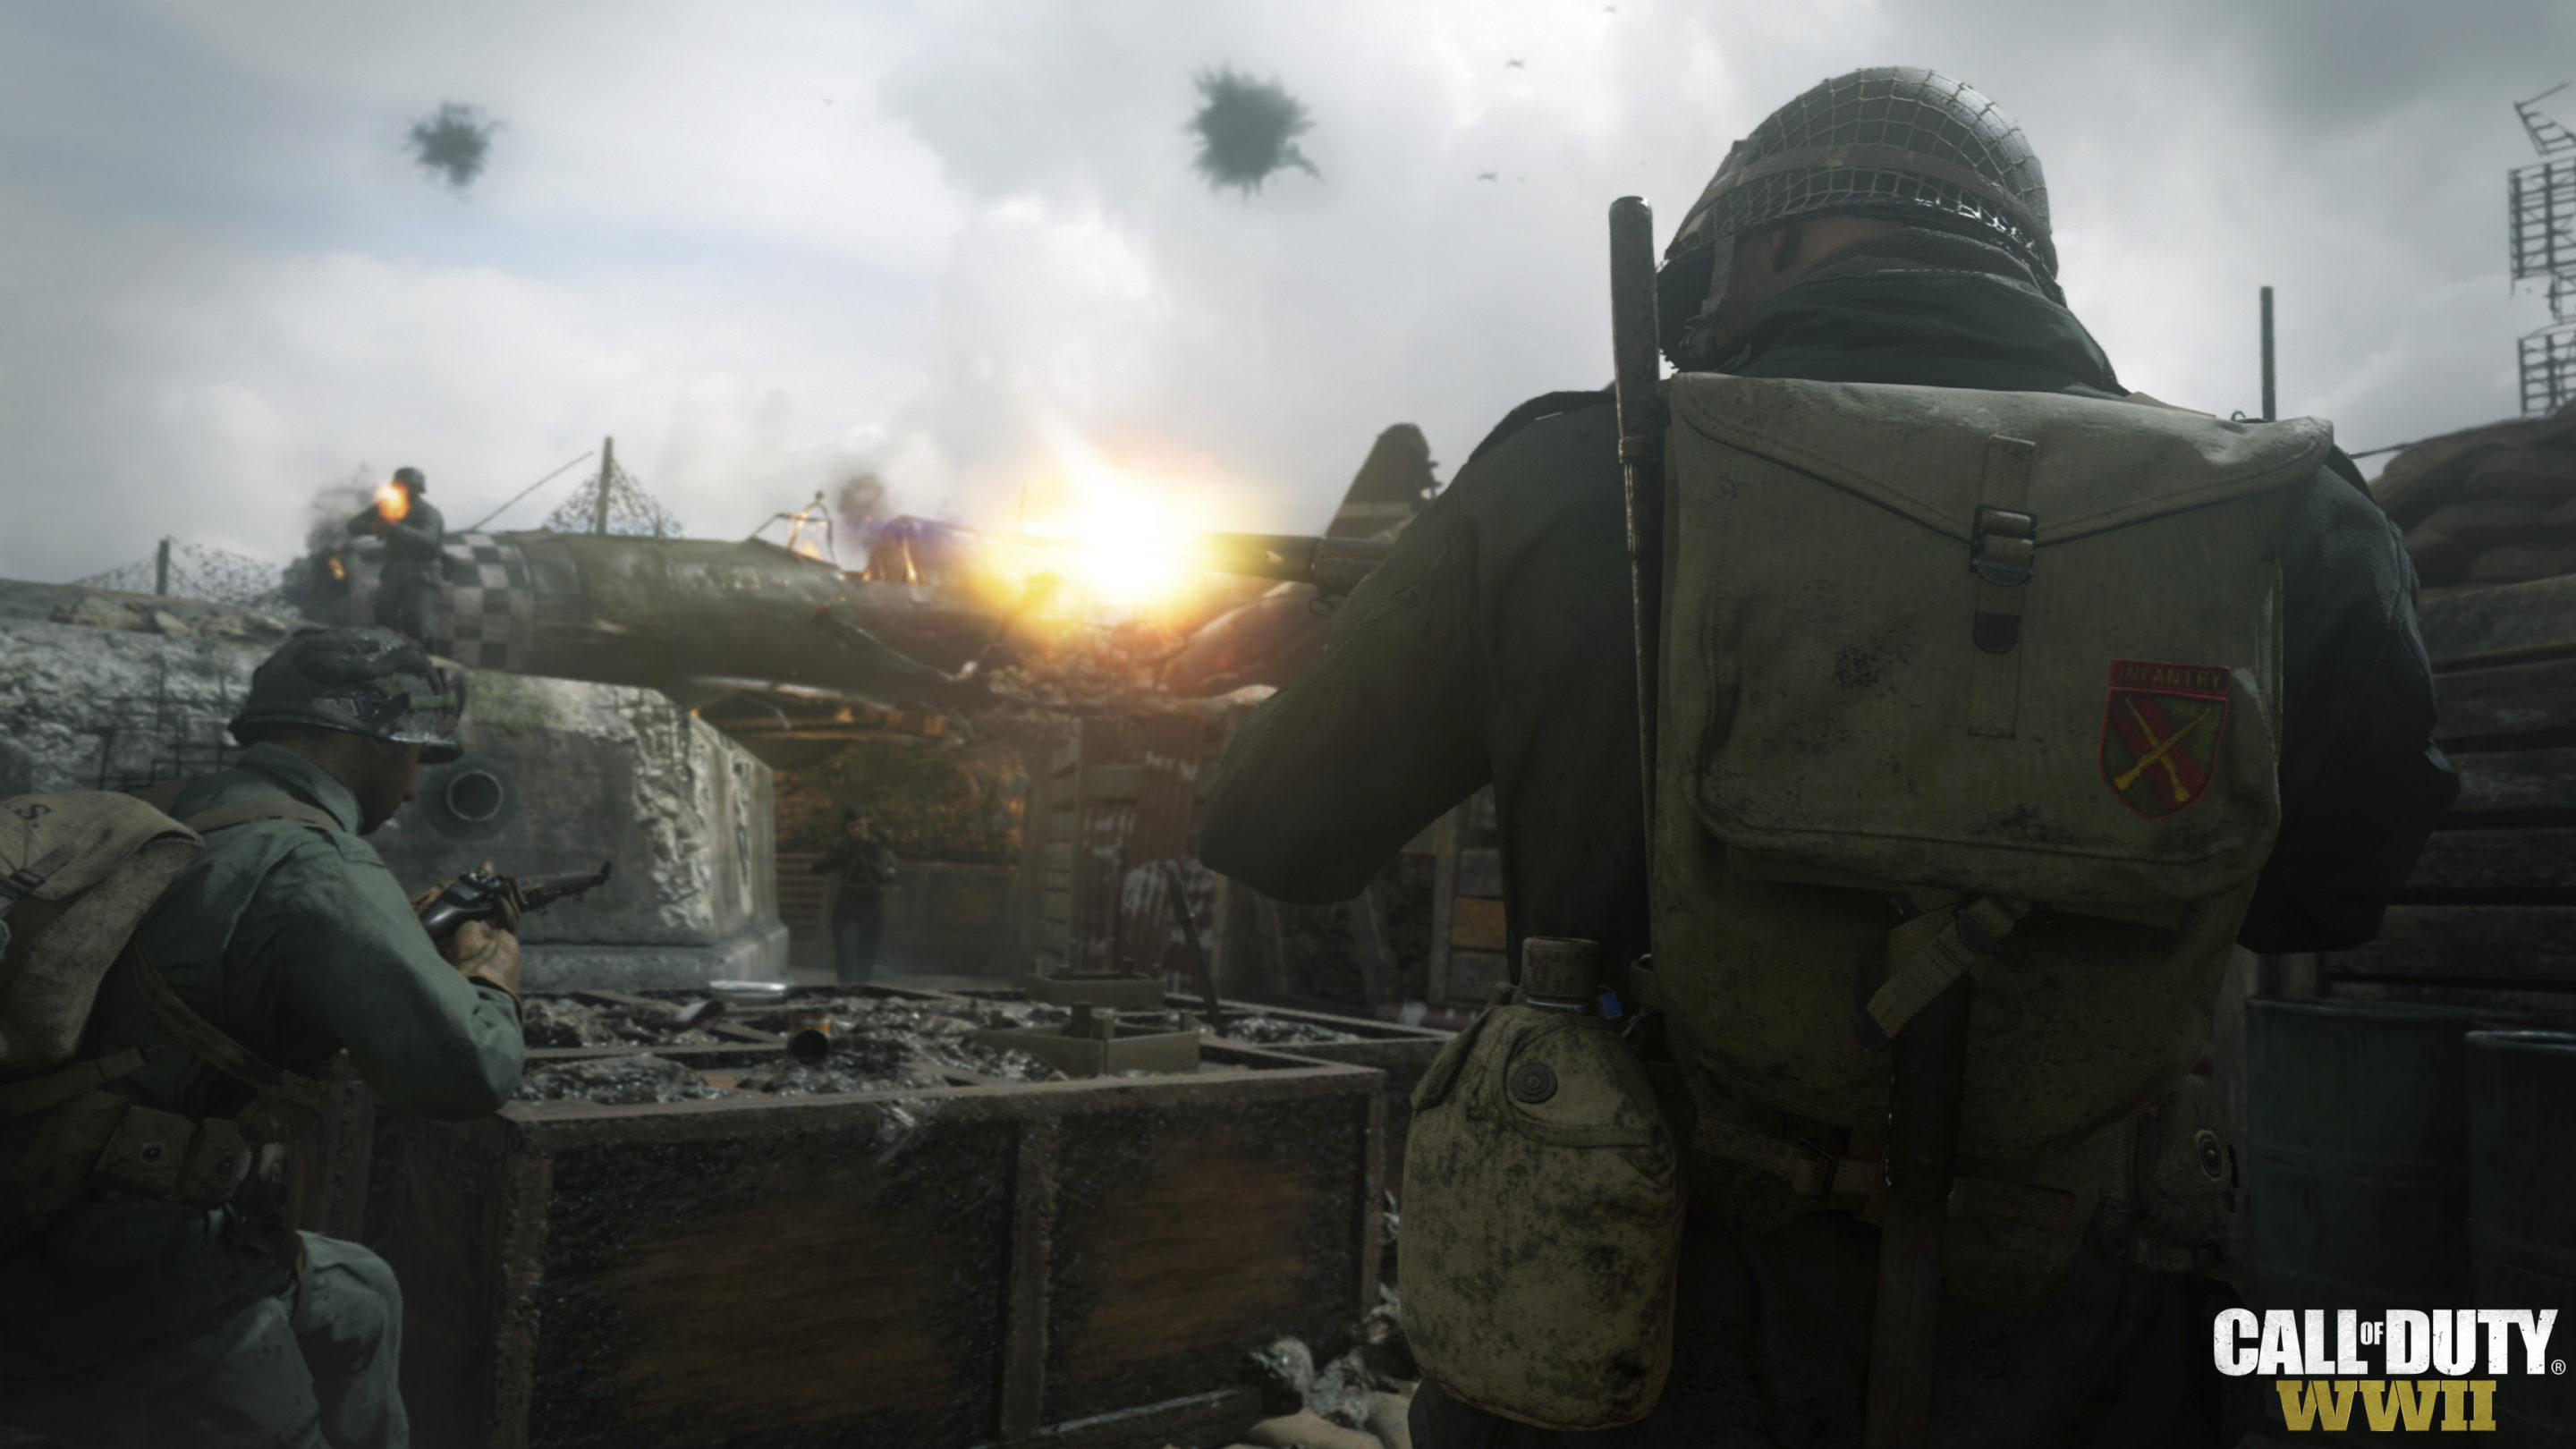  Call of Duty: WWII Was the Best-Selling Game of 2017